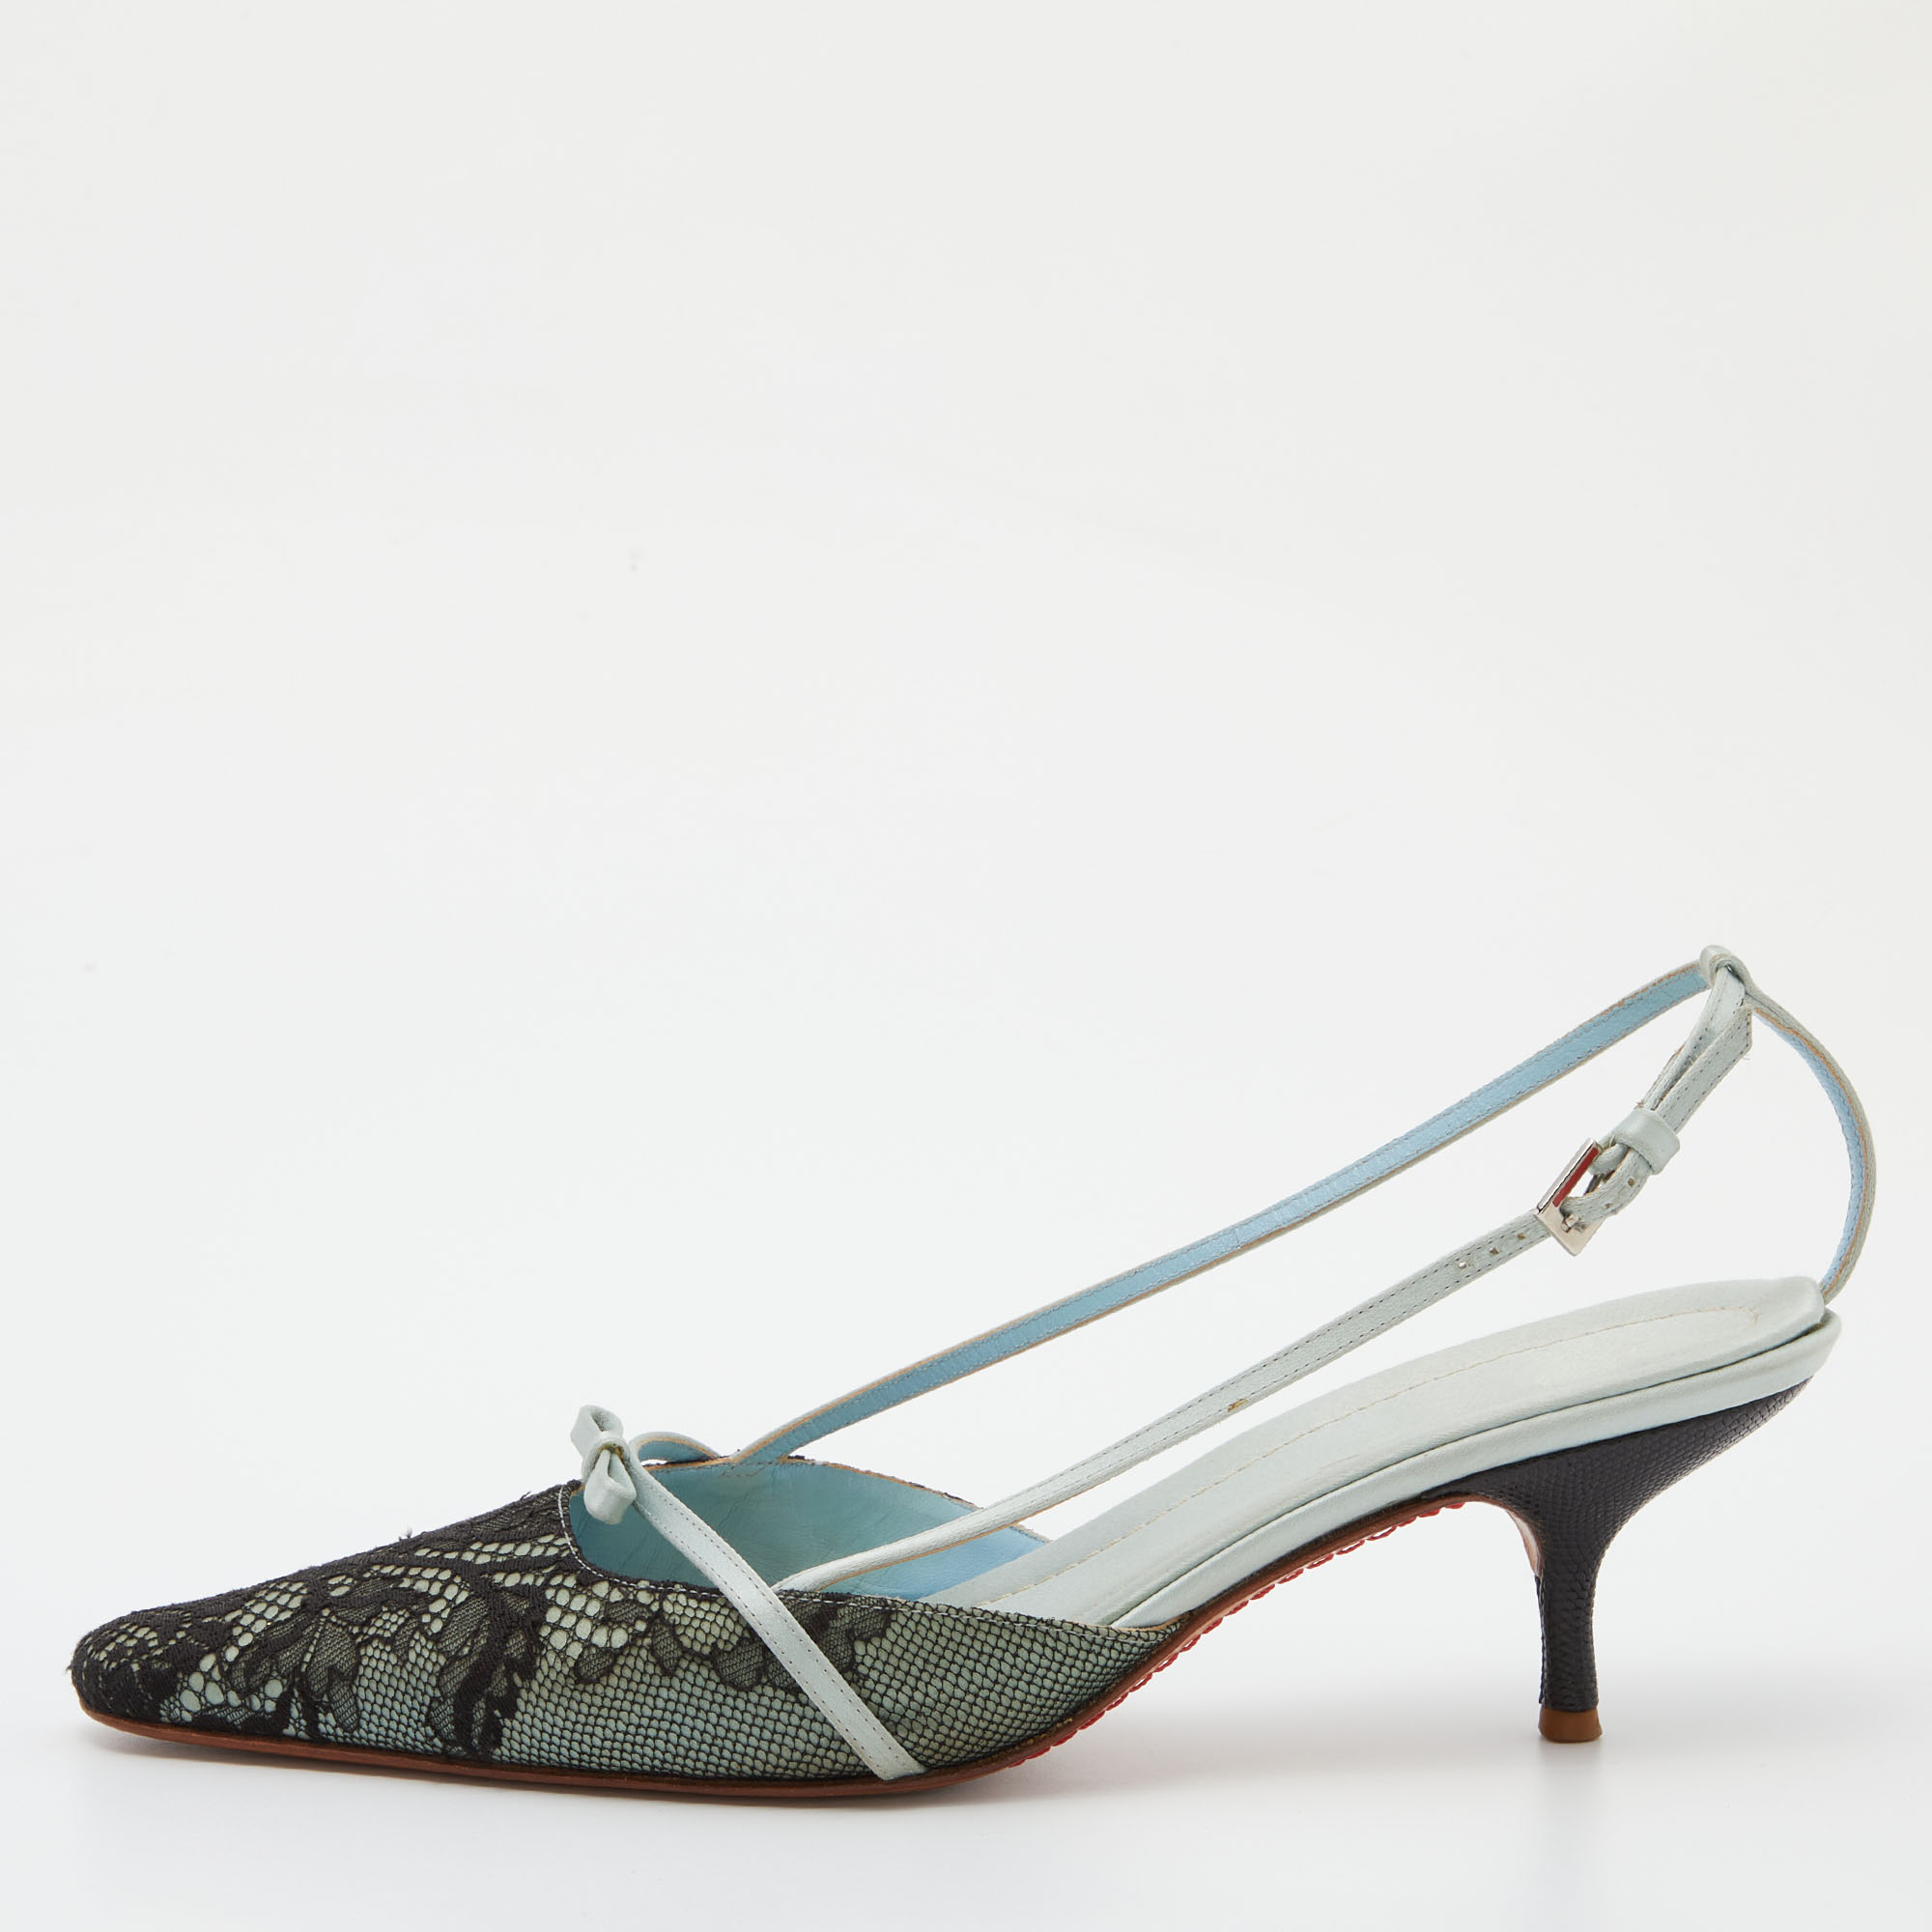 Valentino Black/Green Lace And Satin Bow Slingback Pumps Size 39